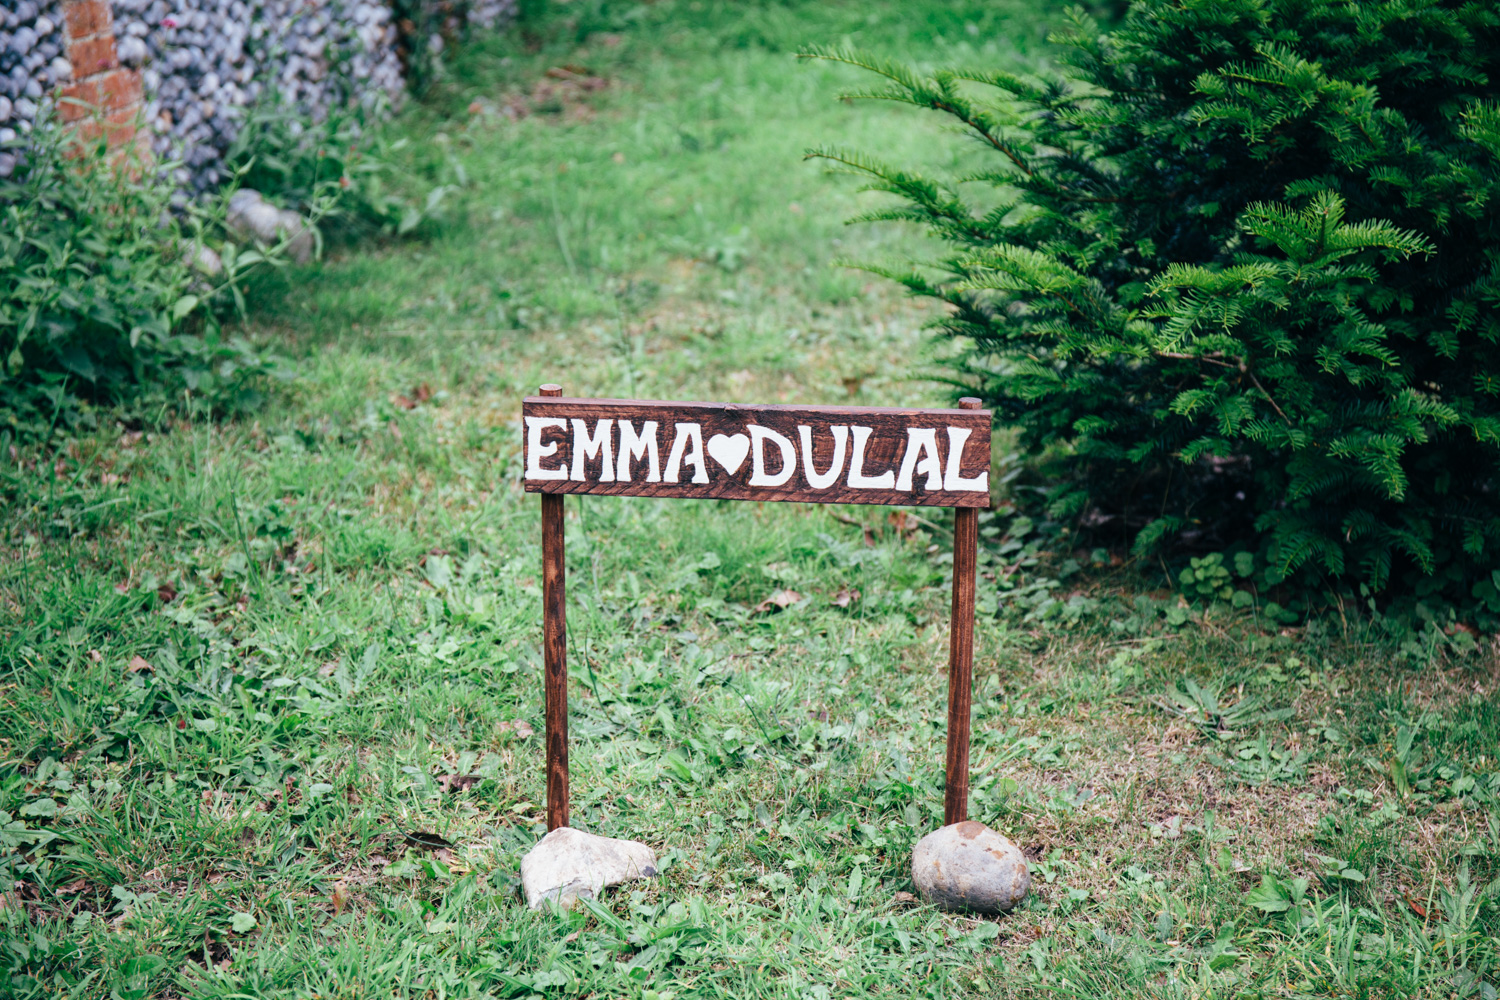 Emma and dull wedding sign at chaucer barn